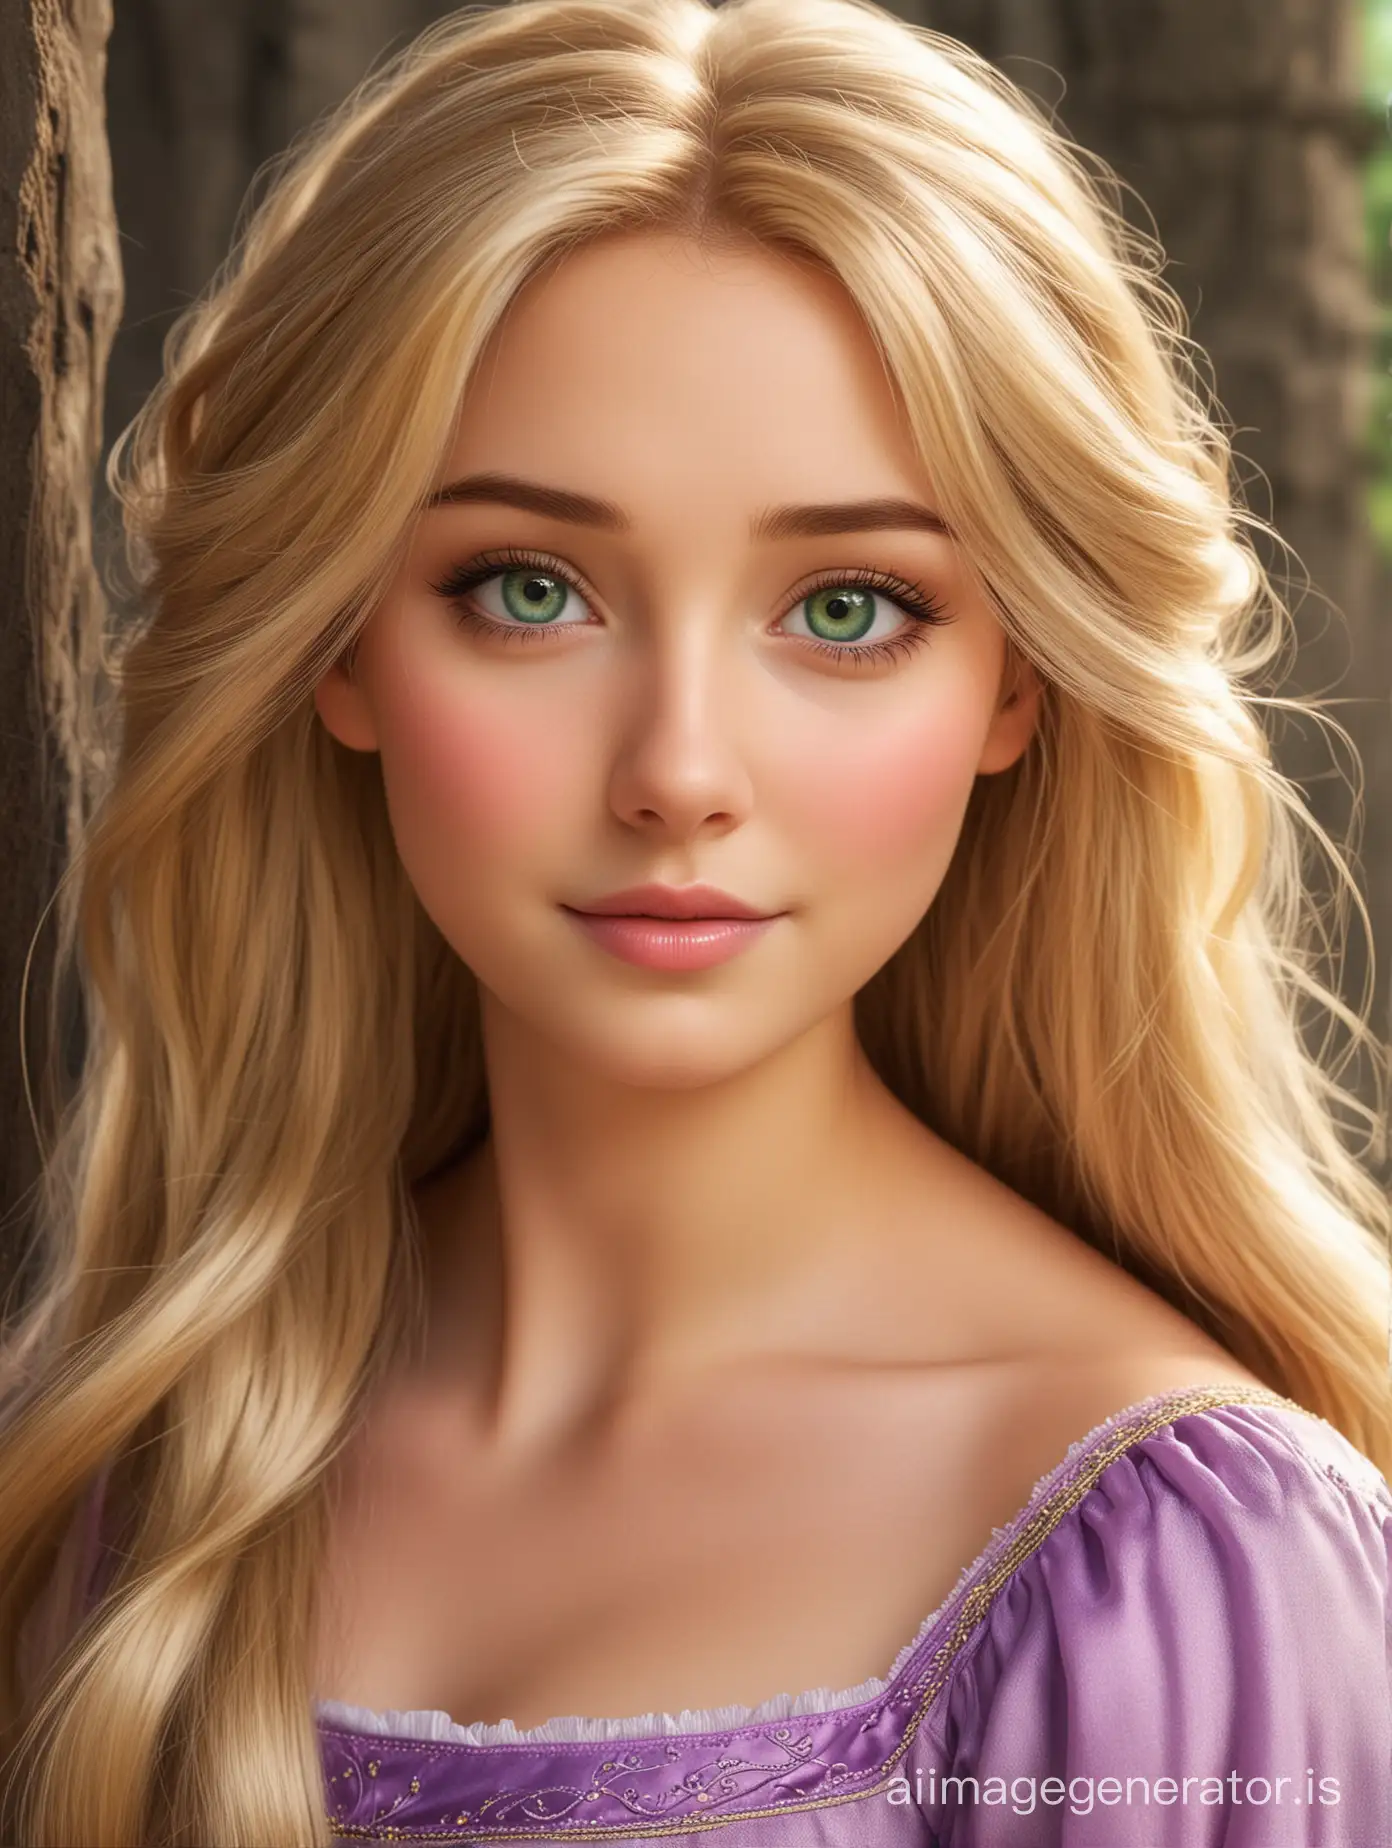 Enchanting-Princess-Rapunzel-with-Blonde-Hair-and-Green-Eyes